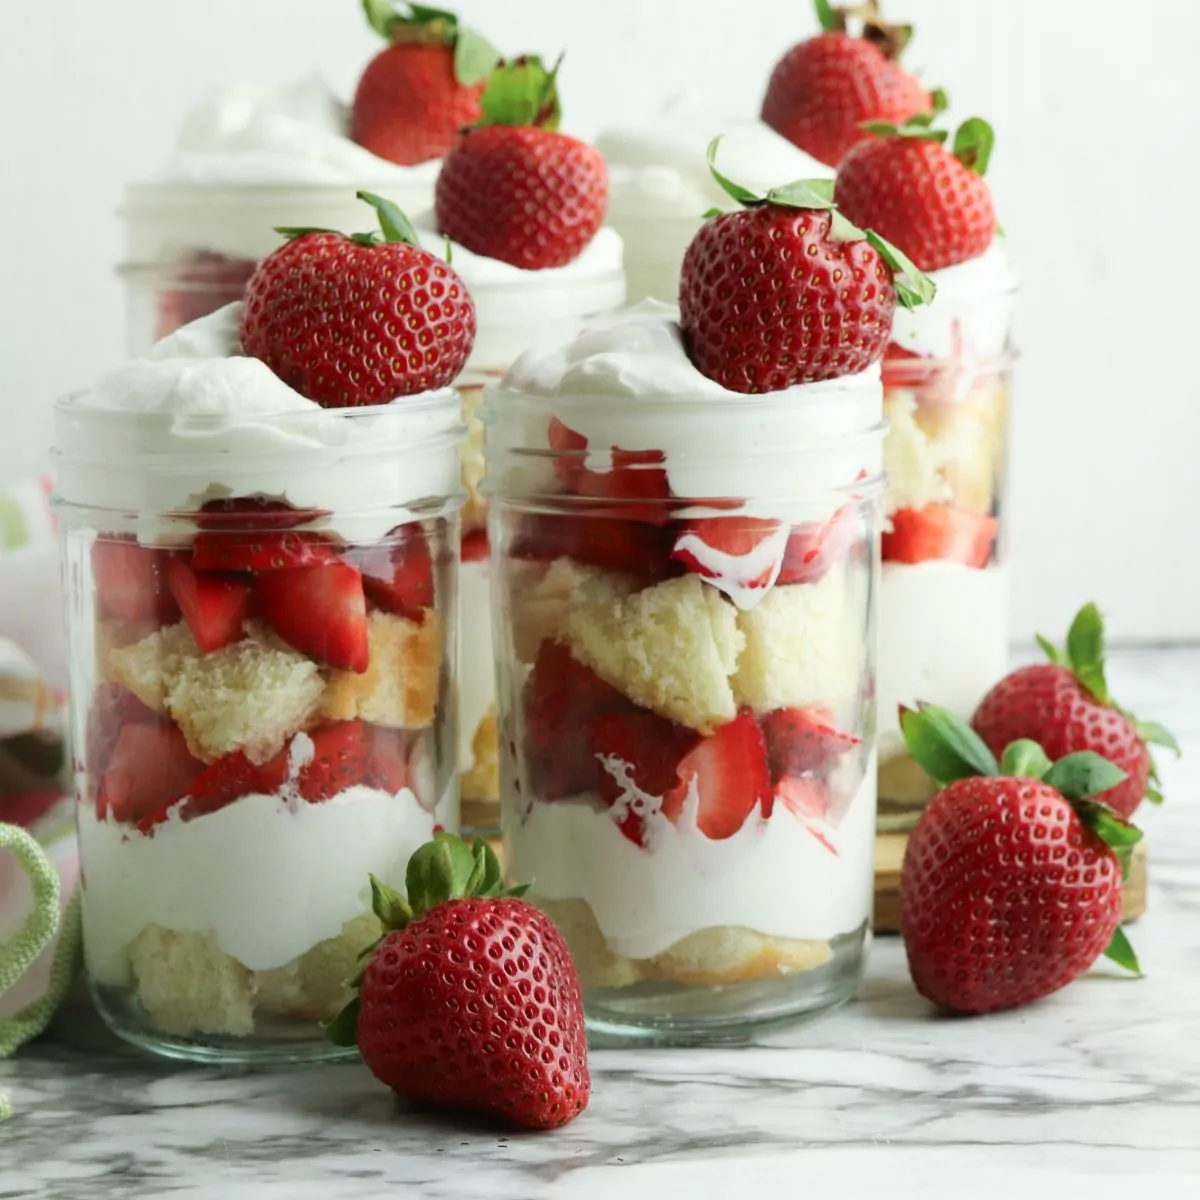 Mason jar filled with layers of pound cake, strawberries, and homemade whipped cream.